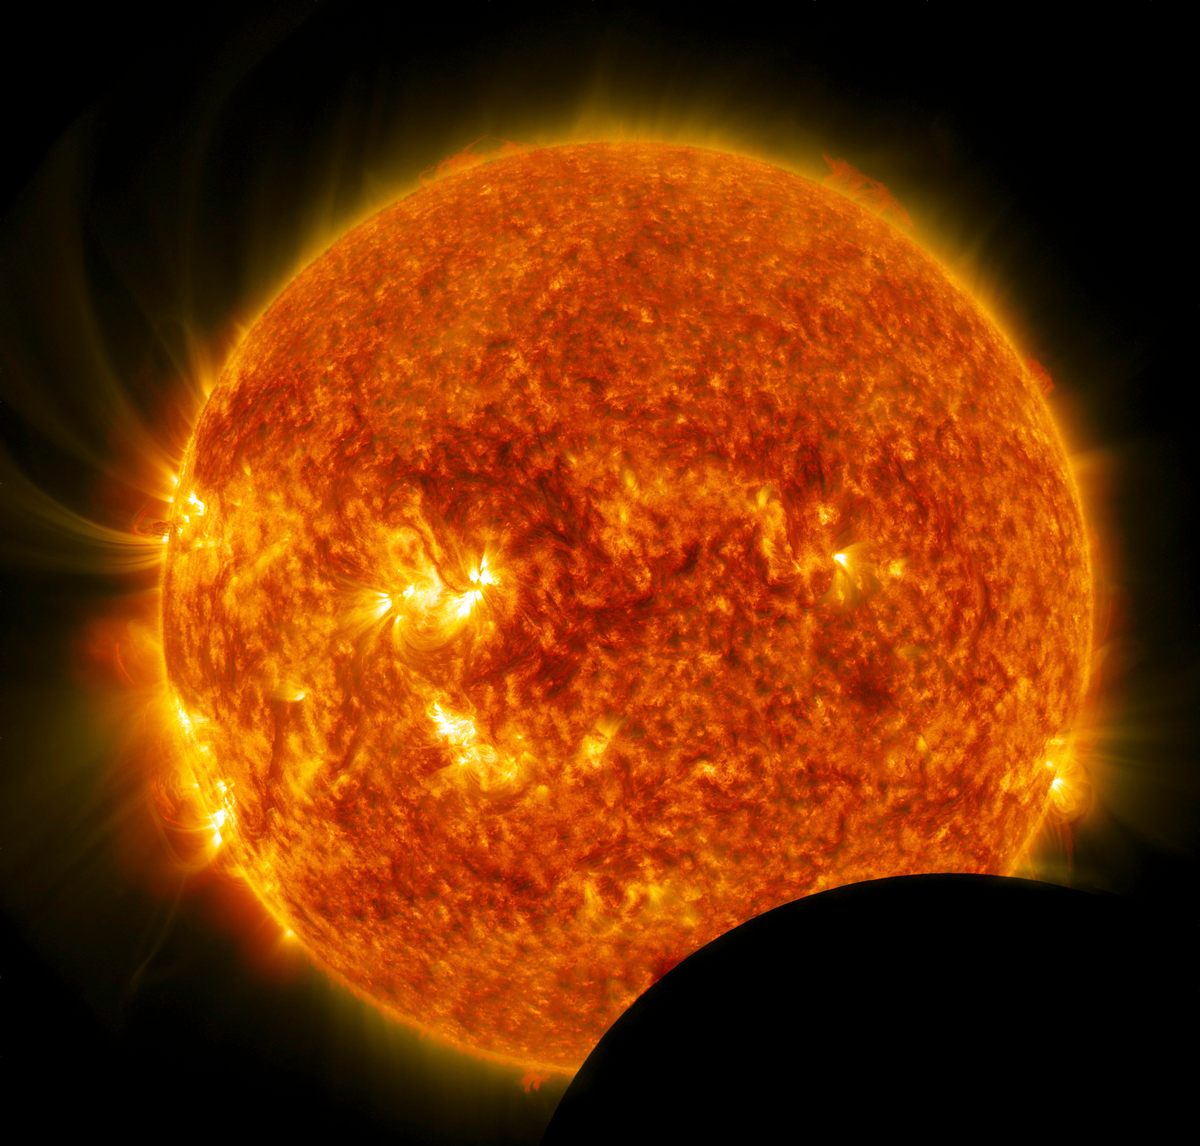 The temperature of the Sun's surface is about 5,600 degrees Celsius (10,000 degrees Fahrenheit). That's hot, but nowhere near the temperature needed to cook electrons off iron.